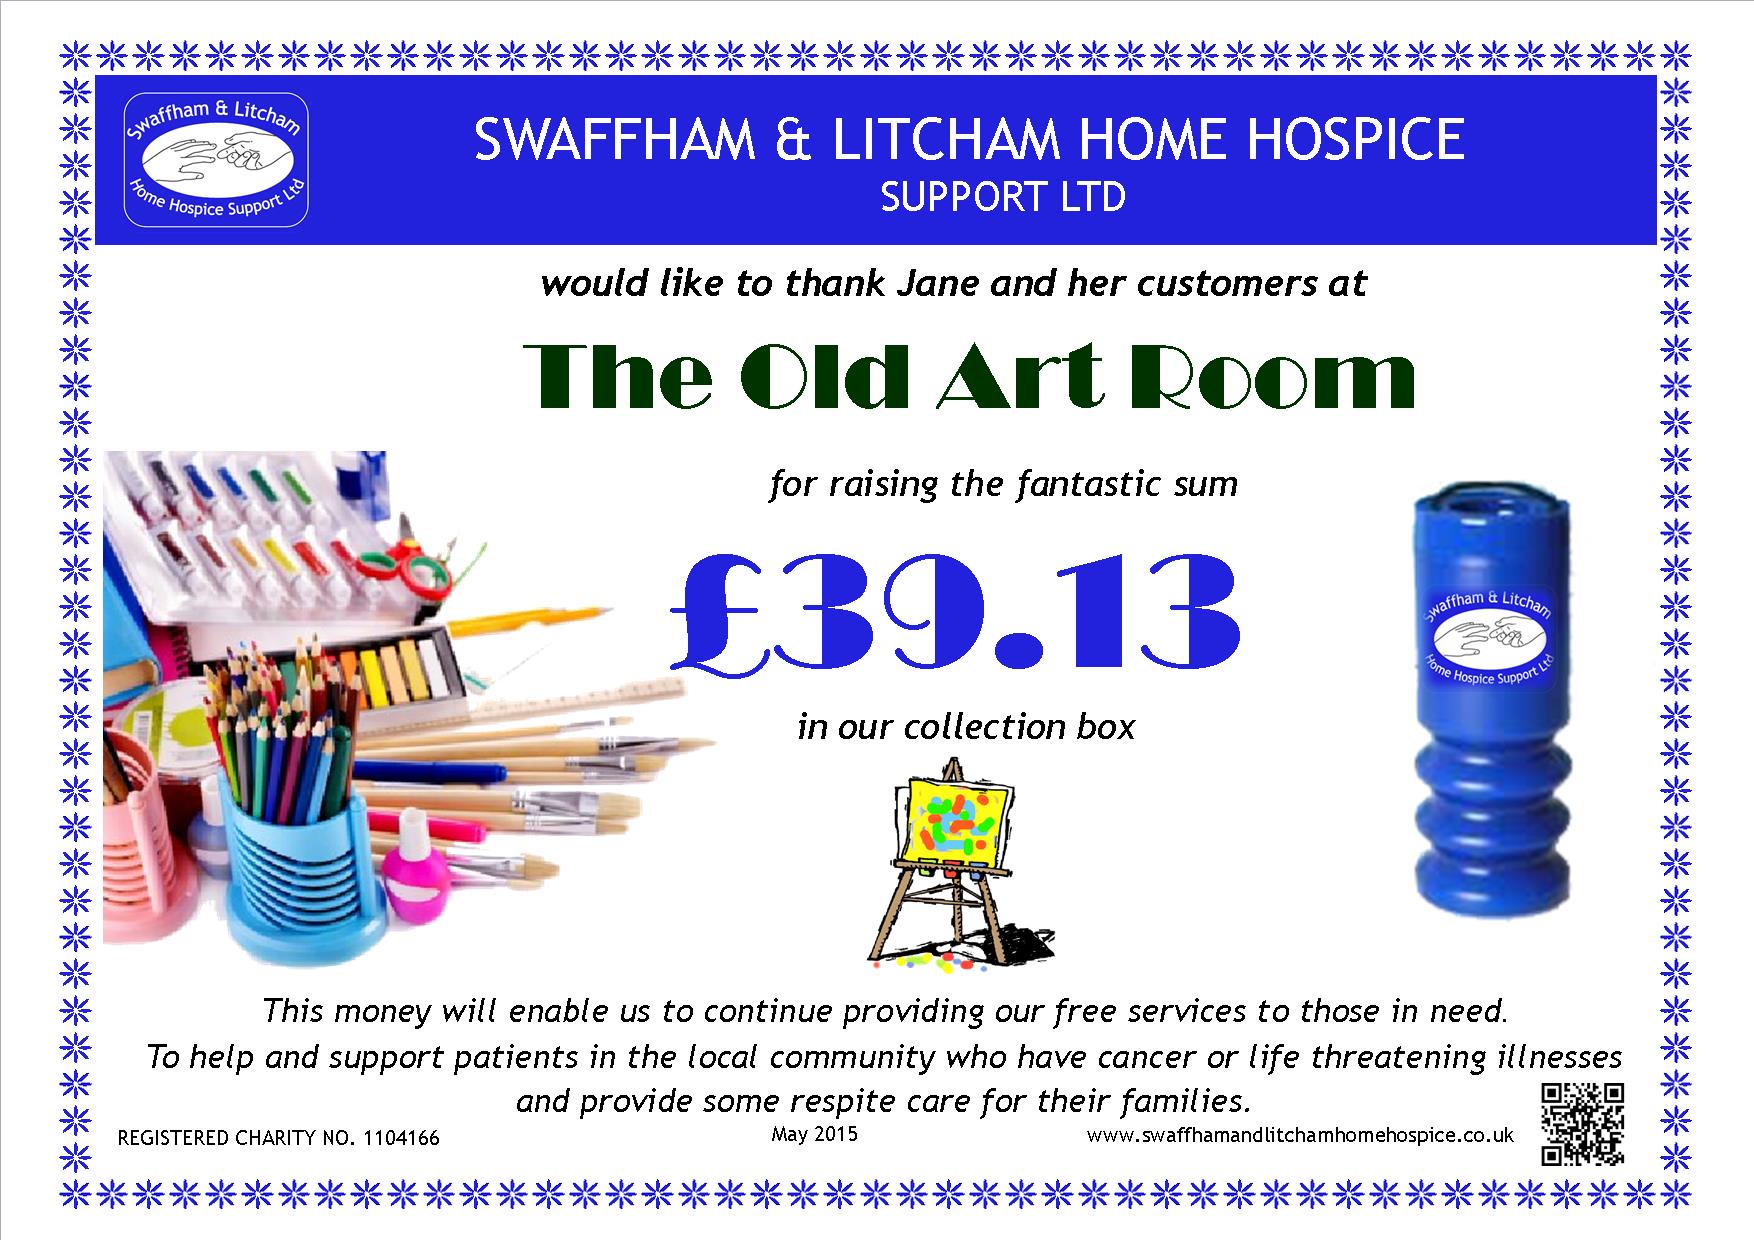 Donated by staff and customers of The Old Art Room, Swaffham